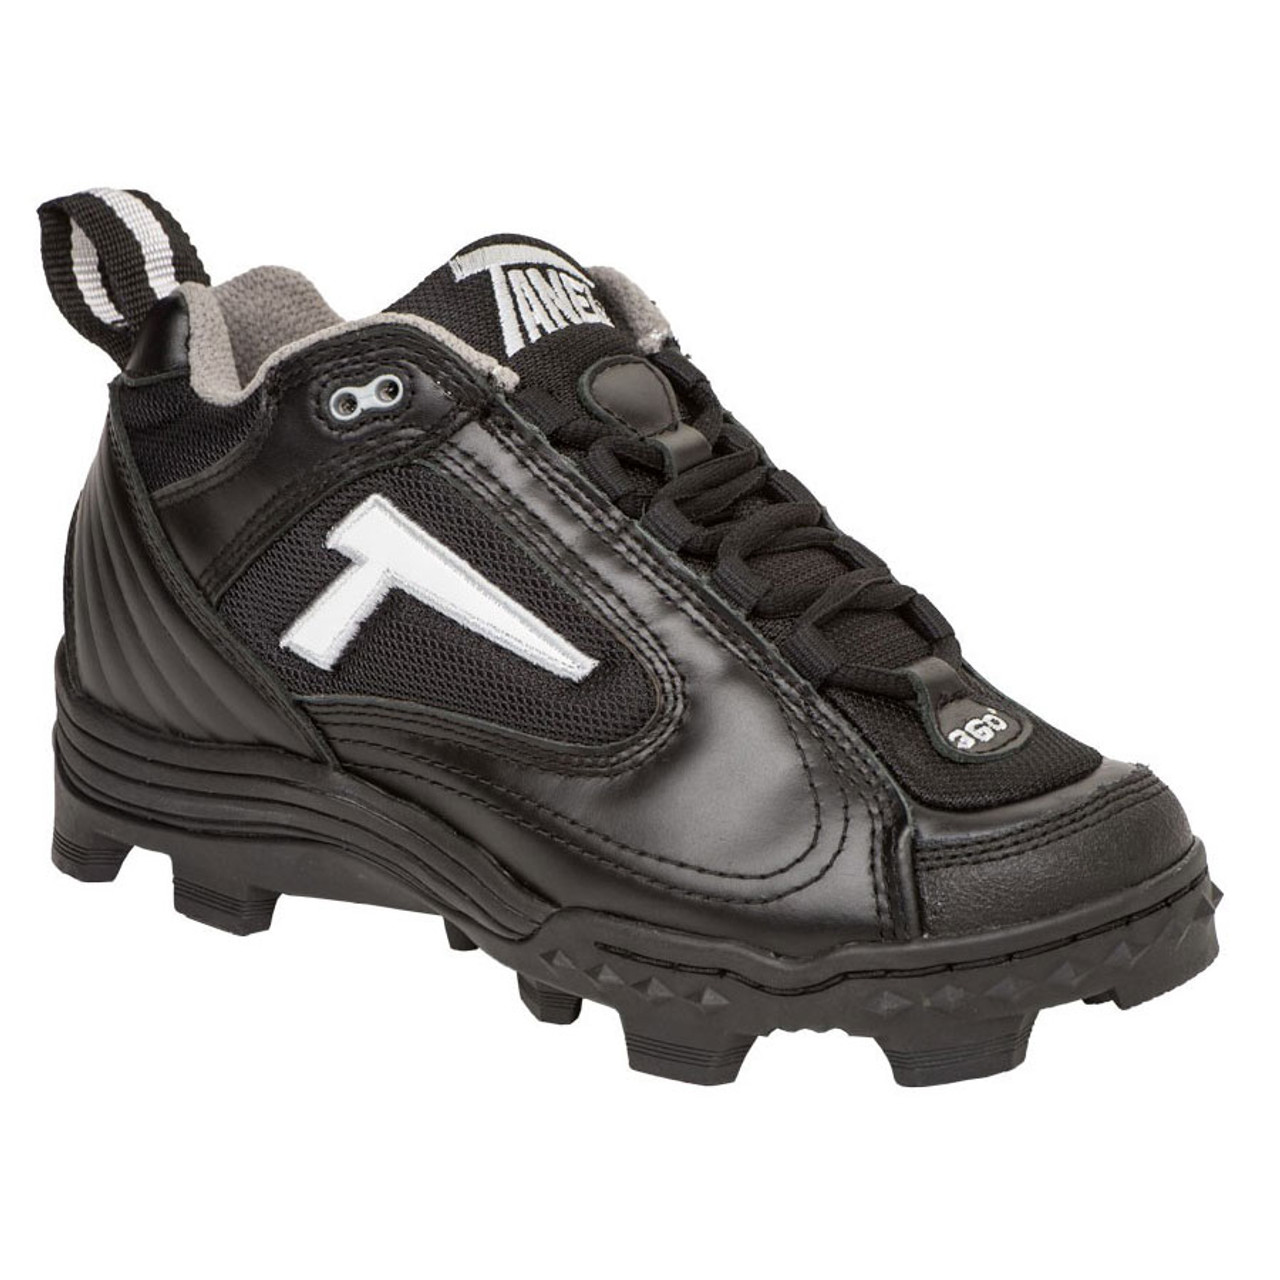 tanel cleats